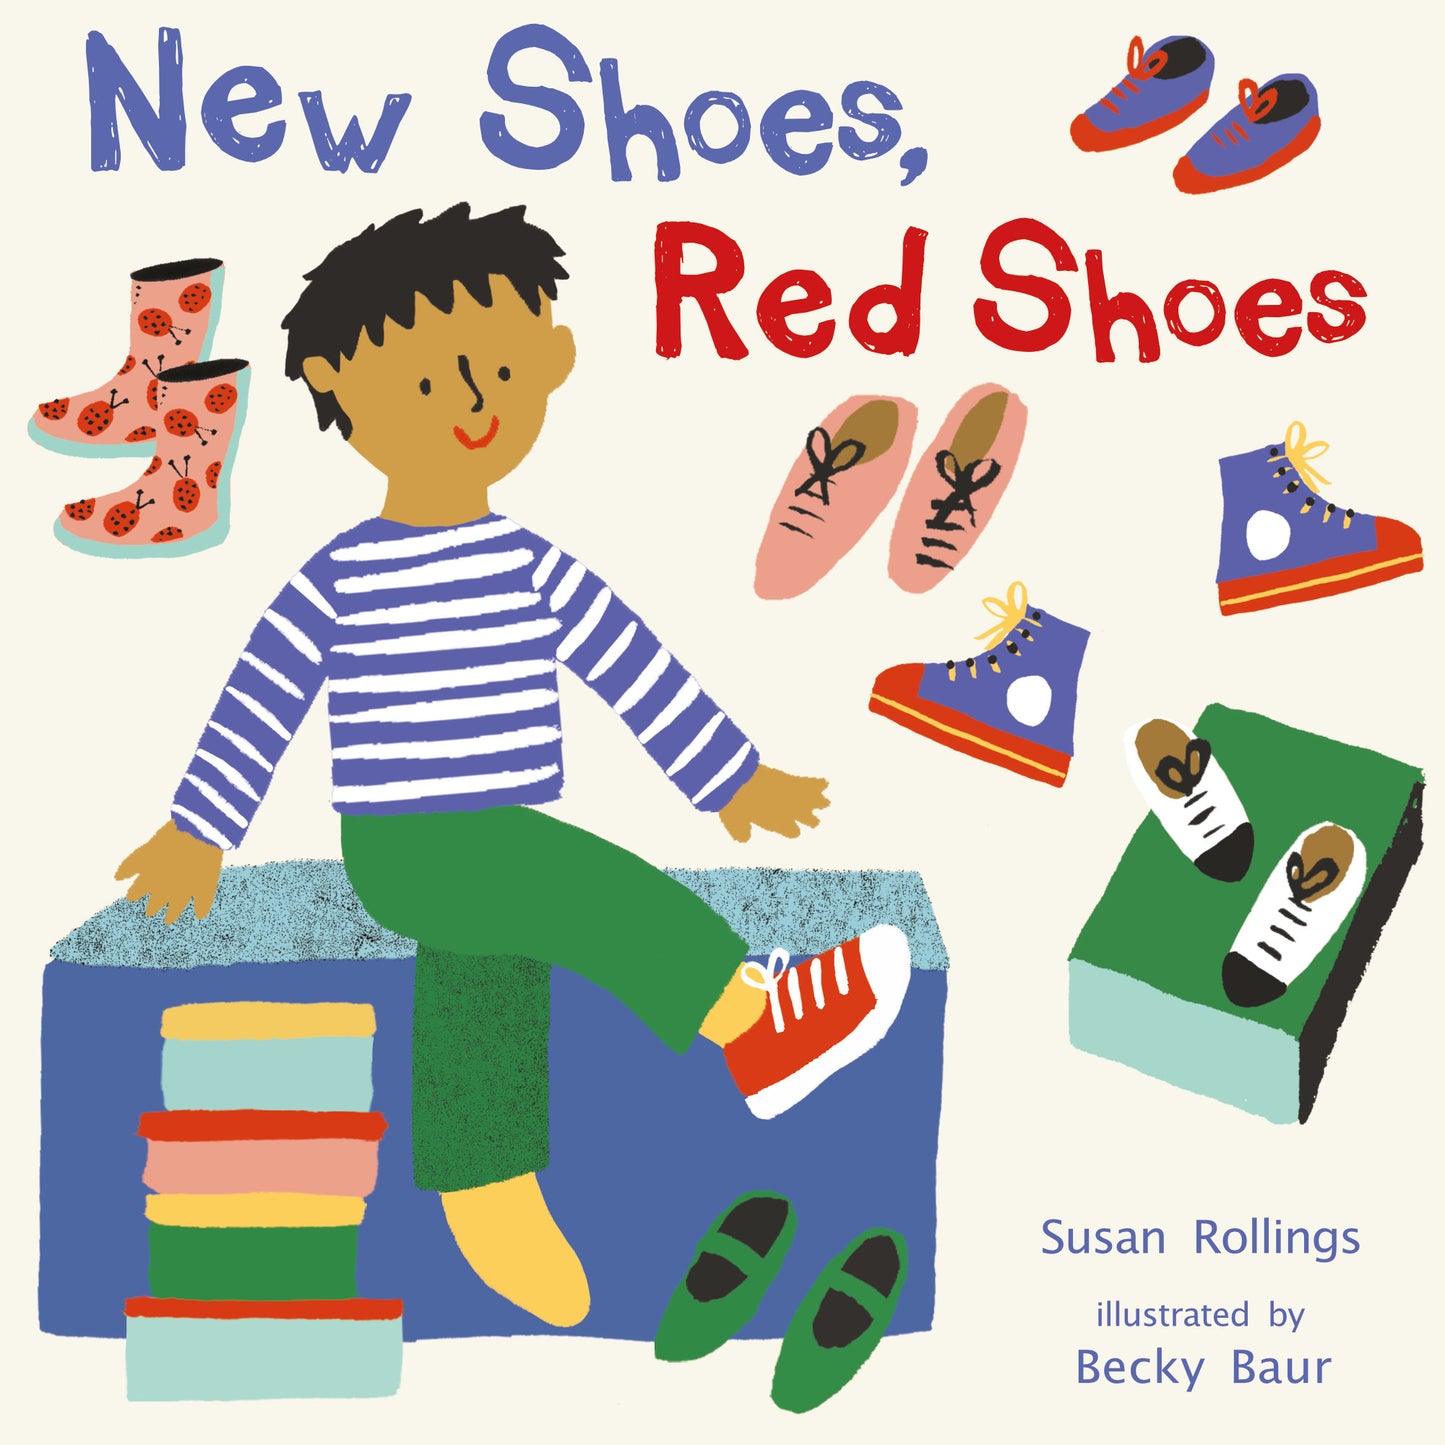 New Shoes, Red Shoes (Hardcover Edition)